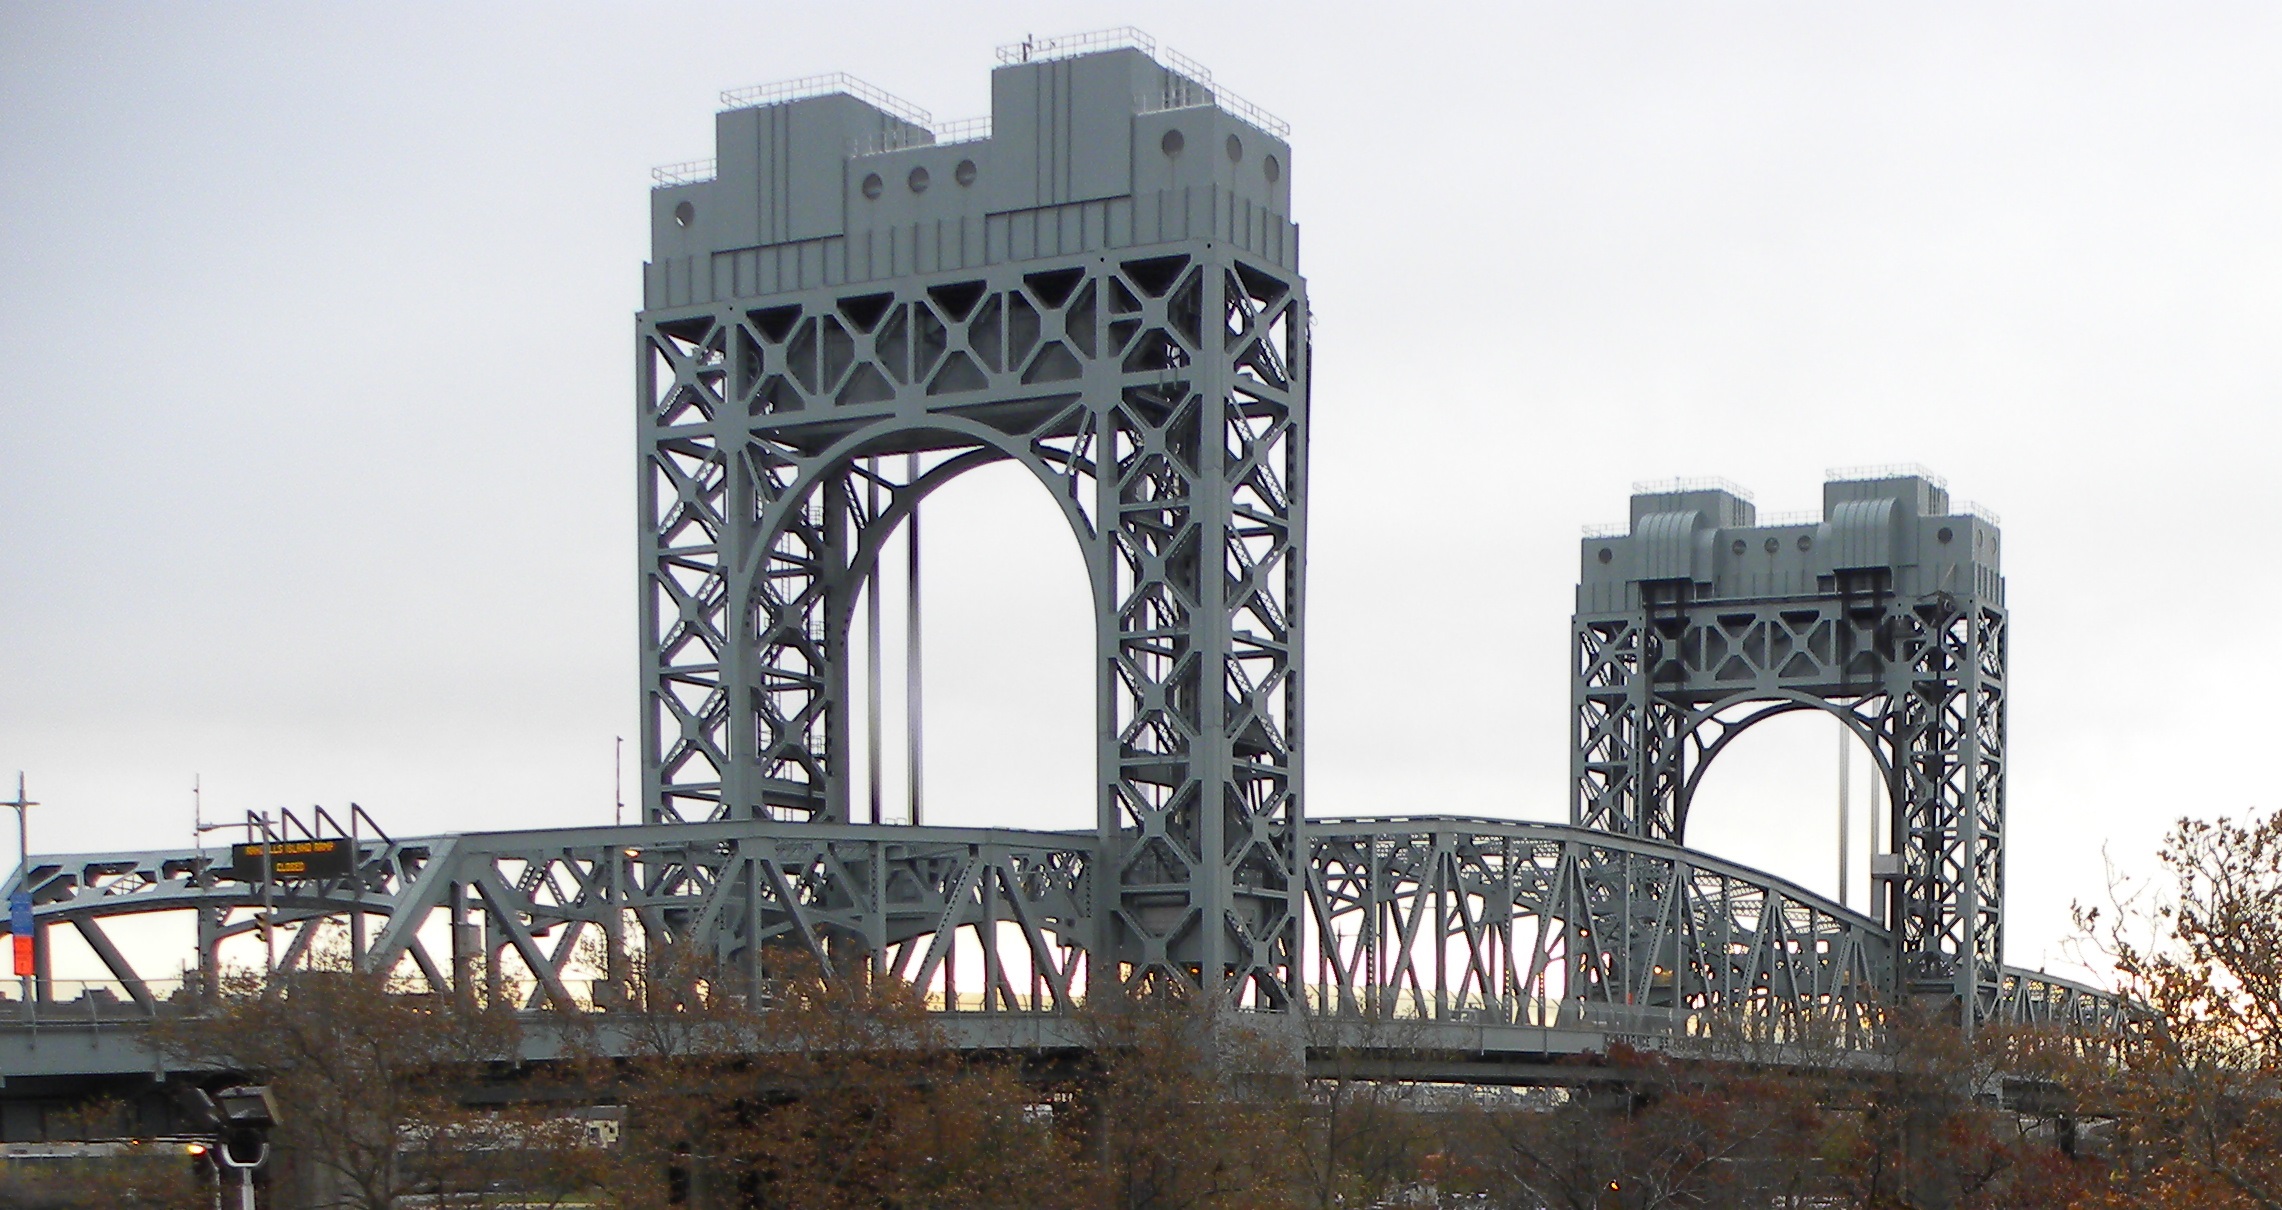 Bridge Lift Testing at RFK Bridge Harlem River Lift Span Scheduled for Early Morning Hours of Tuesday, August 3